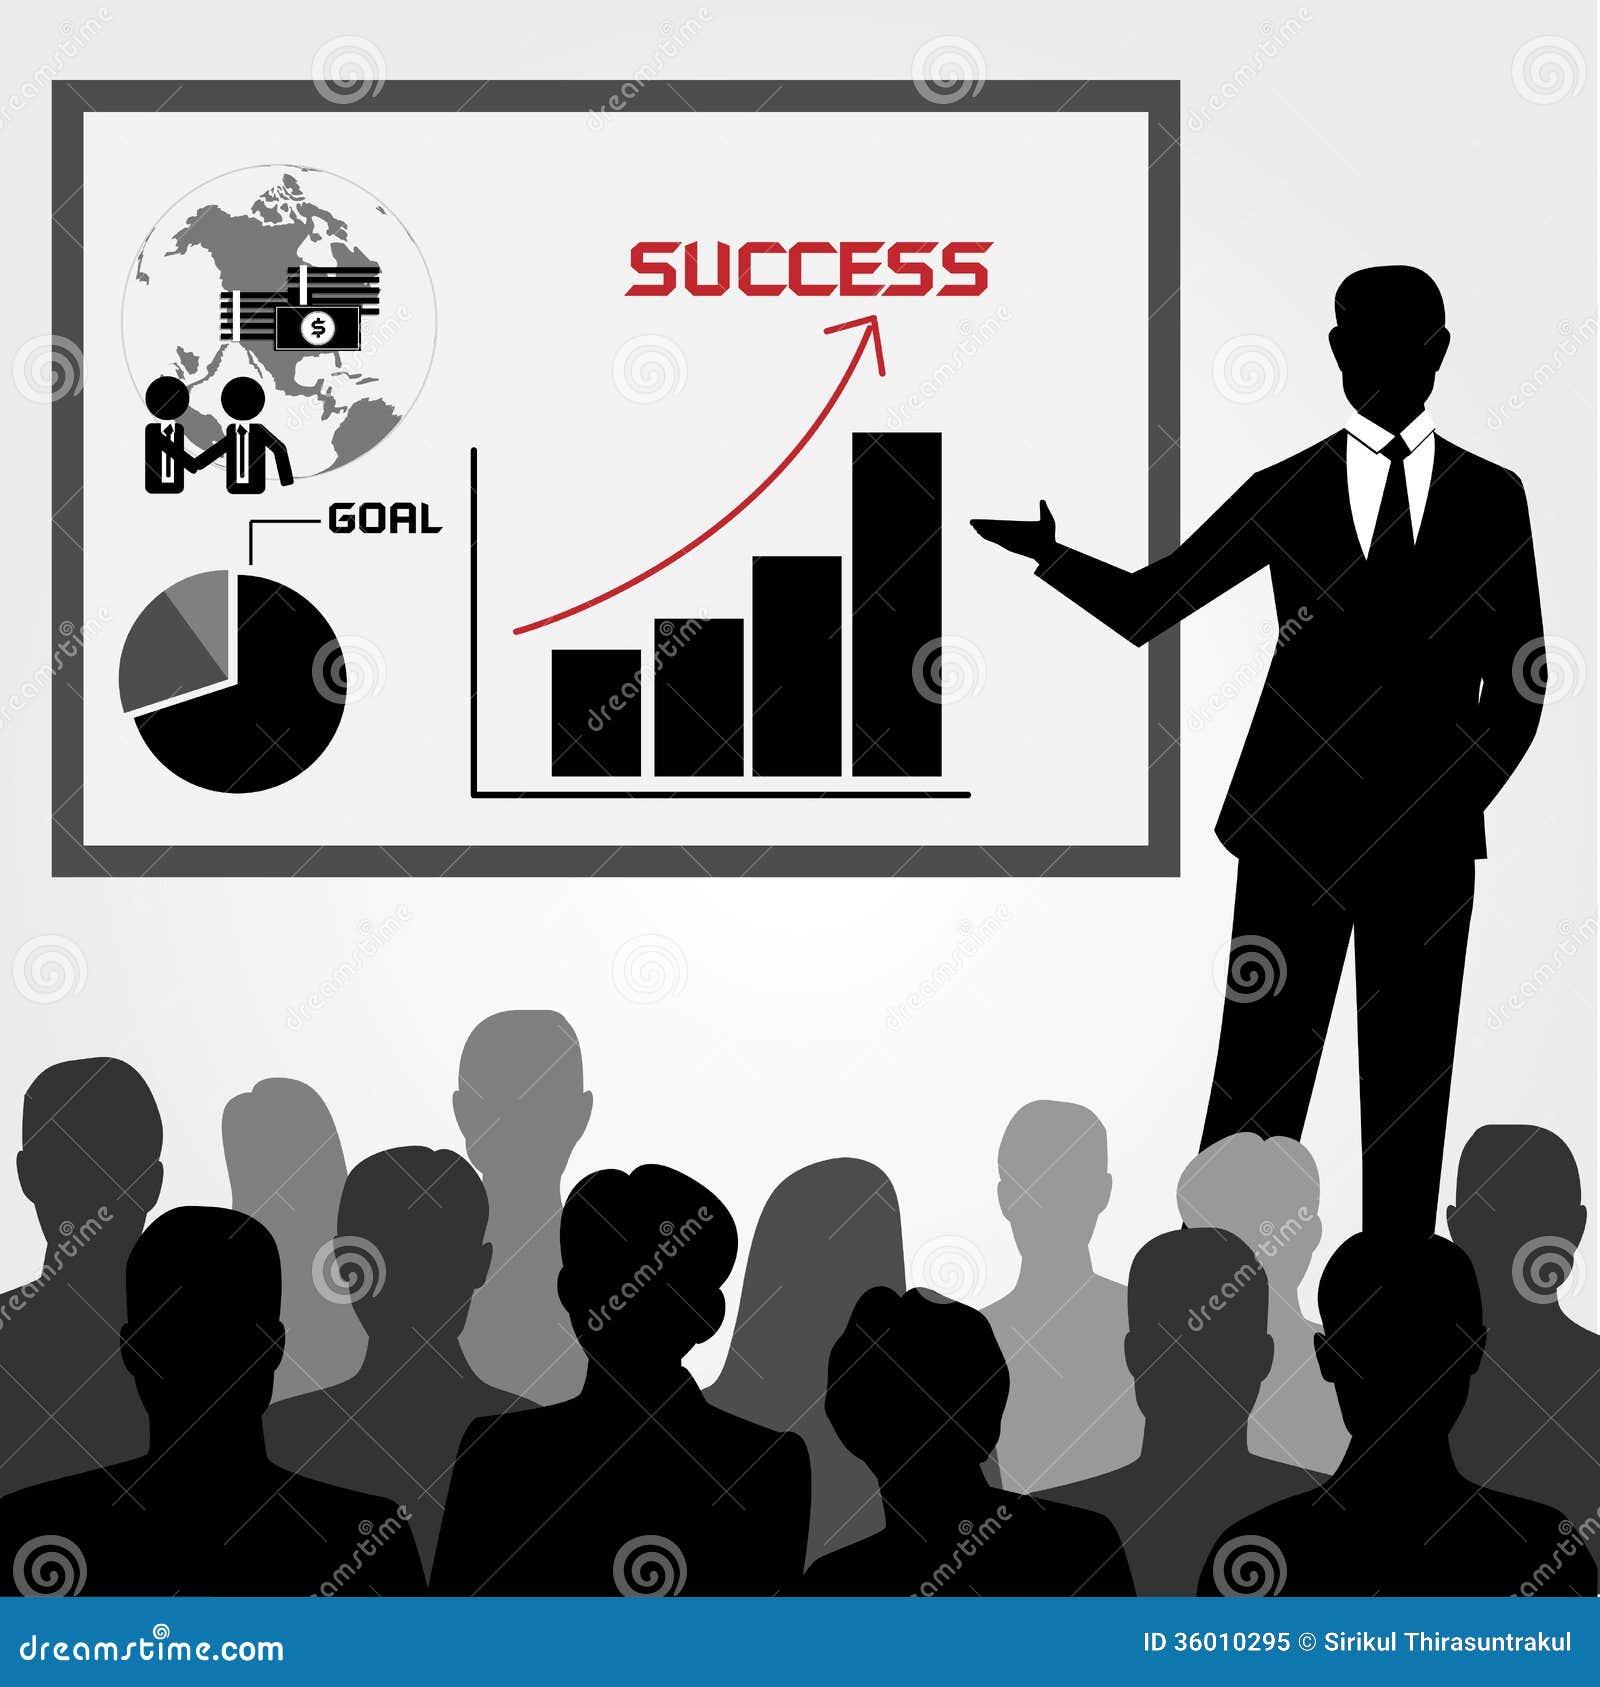 business education clipart - photo #14